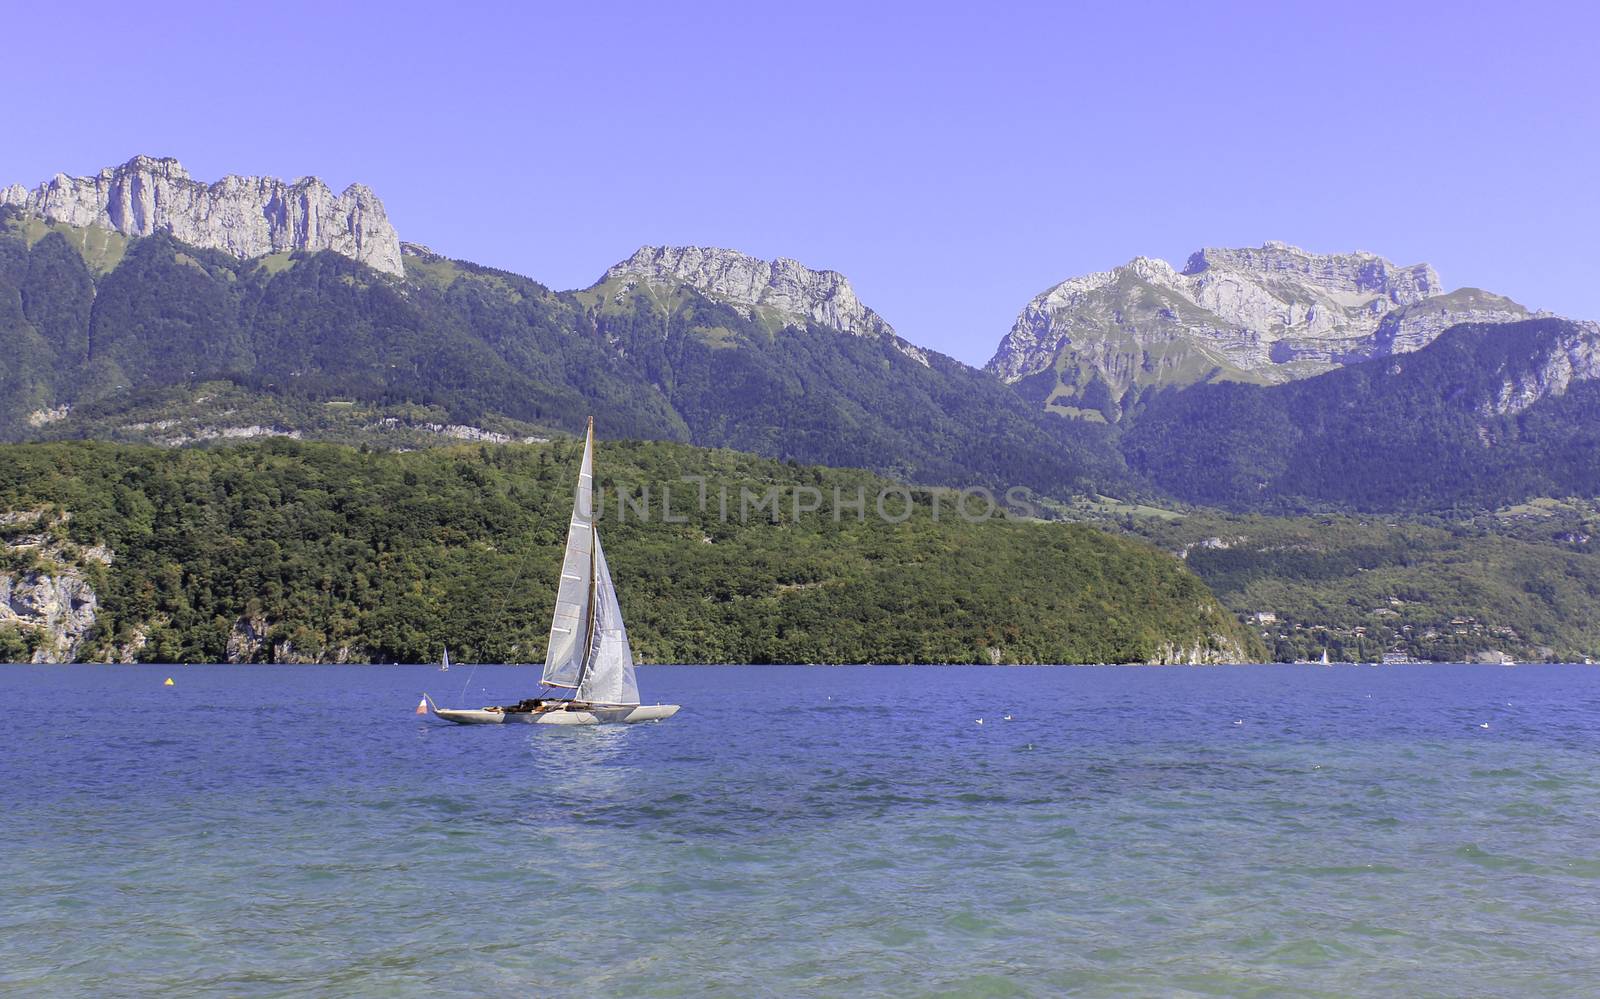 A sailing boat on a stunning blue lake with a fabulous mountainous backdrop